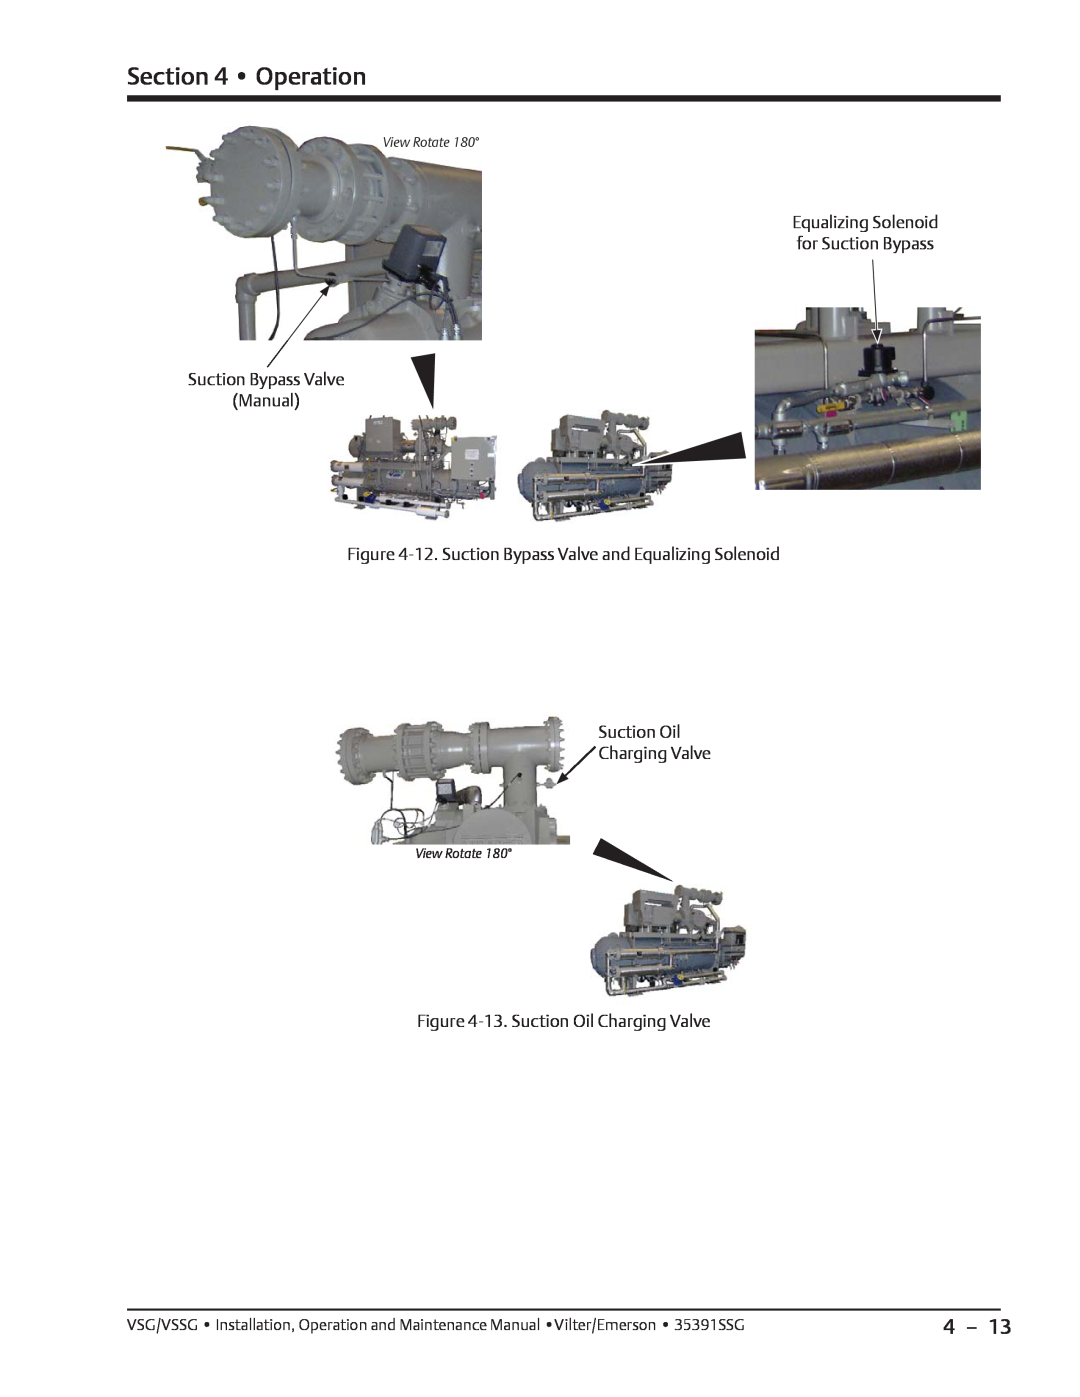 Emerson VSG Operation, Equalizing Solenoid for Suction Bypass Suction Bypass Valve Manual, Charging Valve, View Rotate 